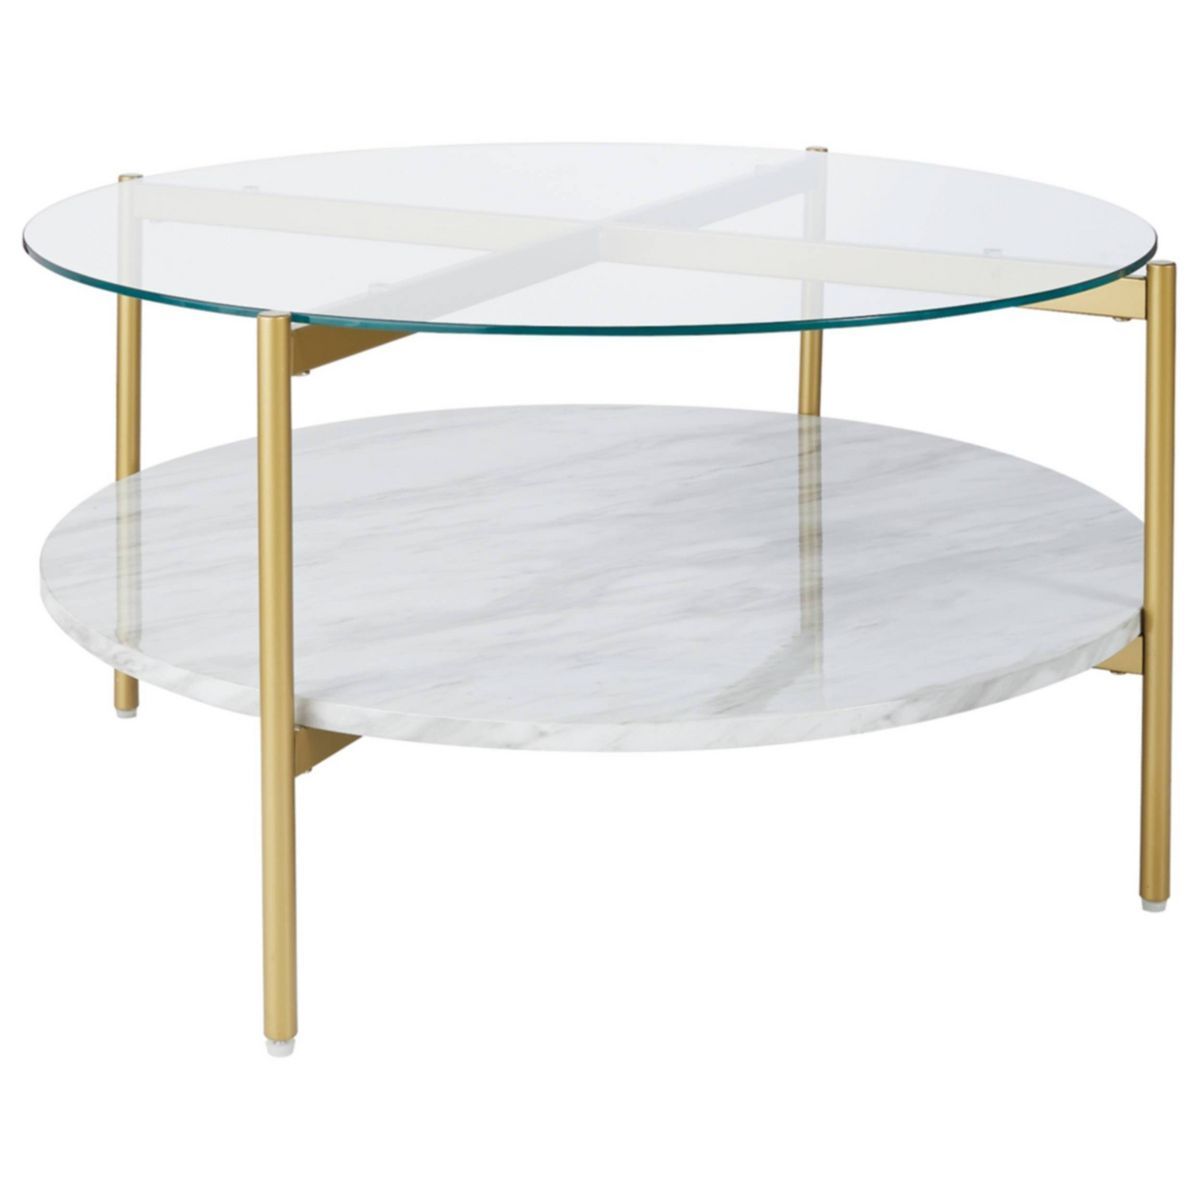 Wynora Round Cocktail Table White/Gold - Signature Design by Ashley | Target